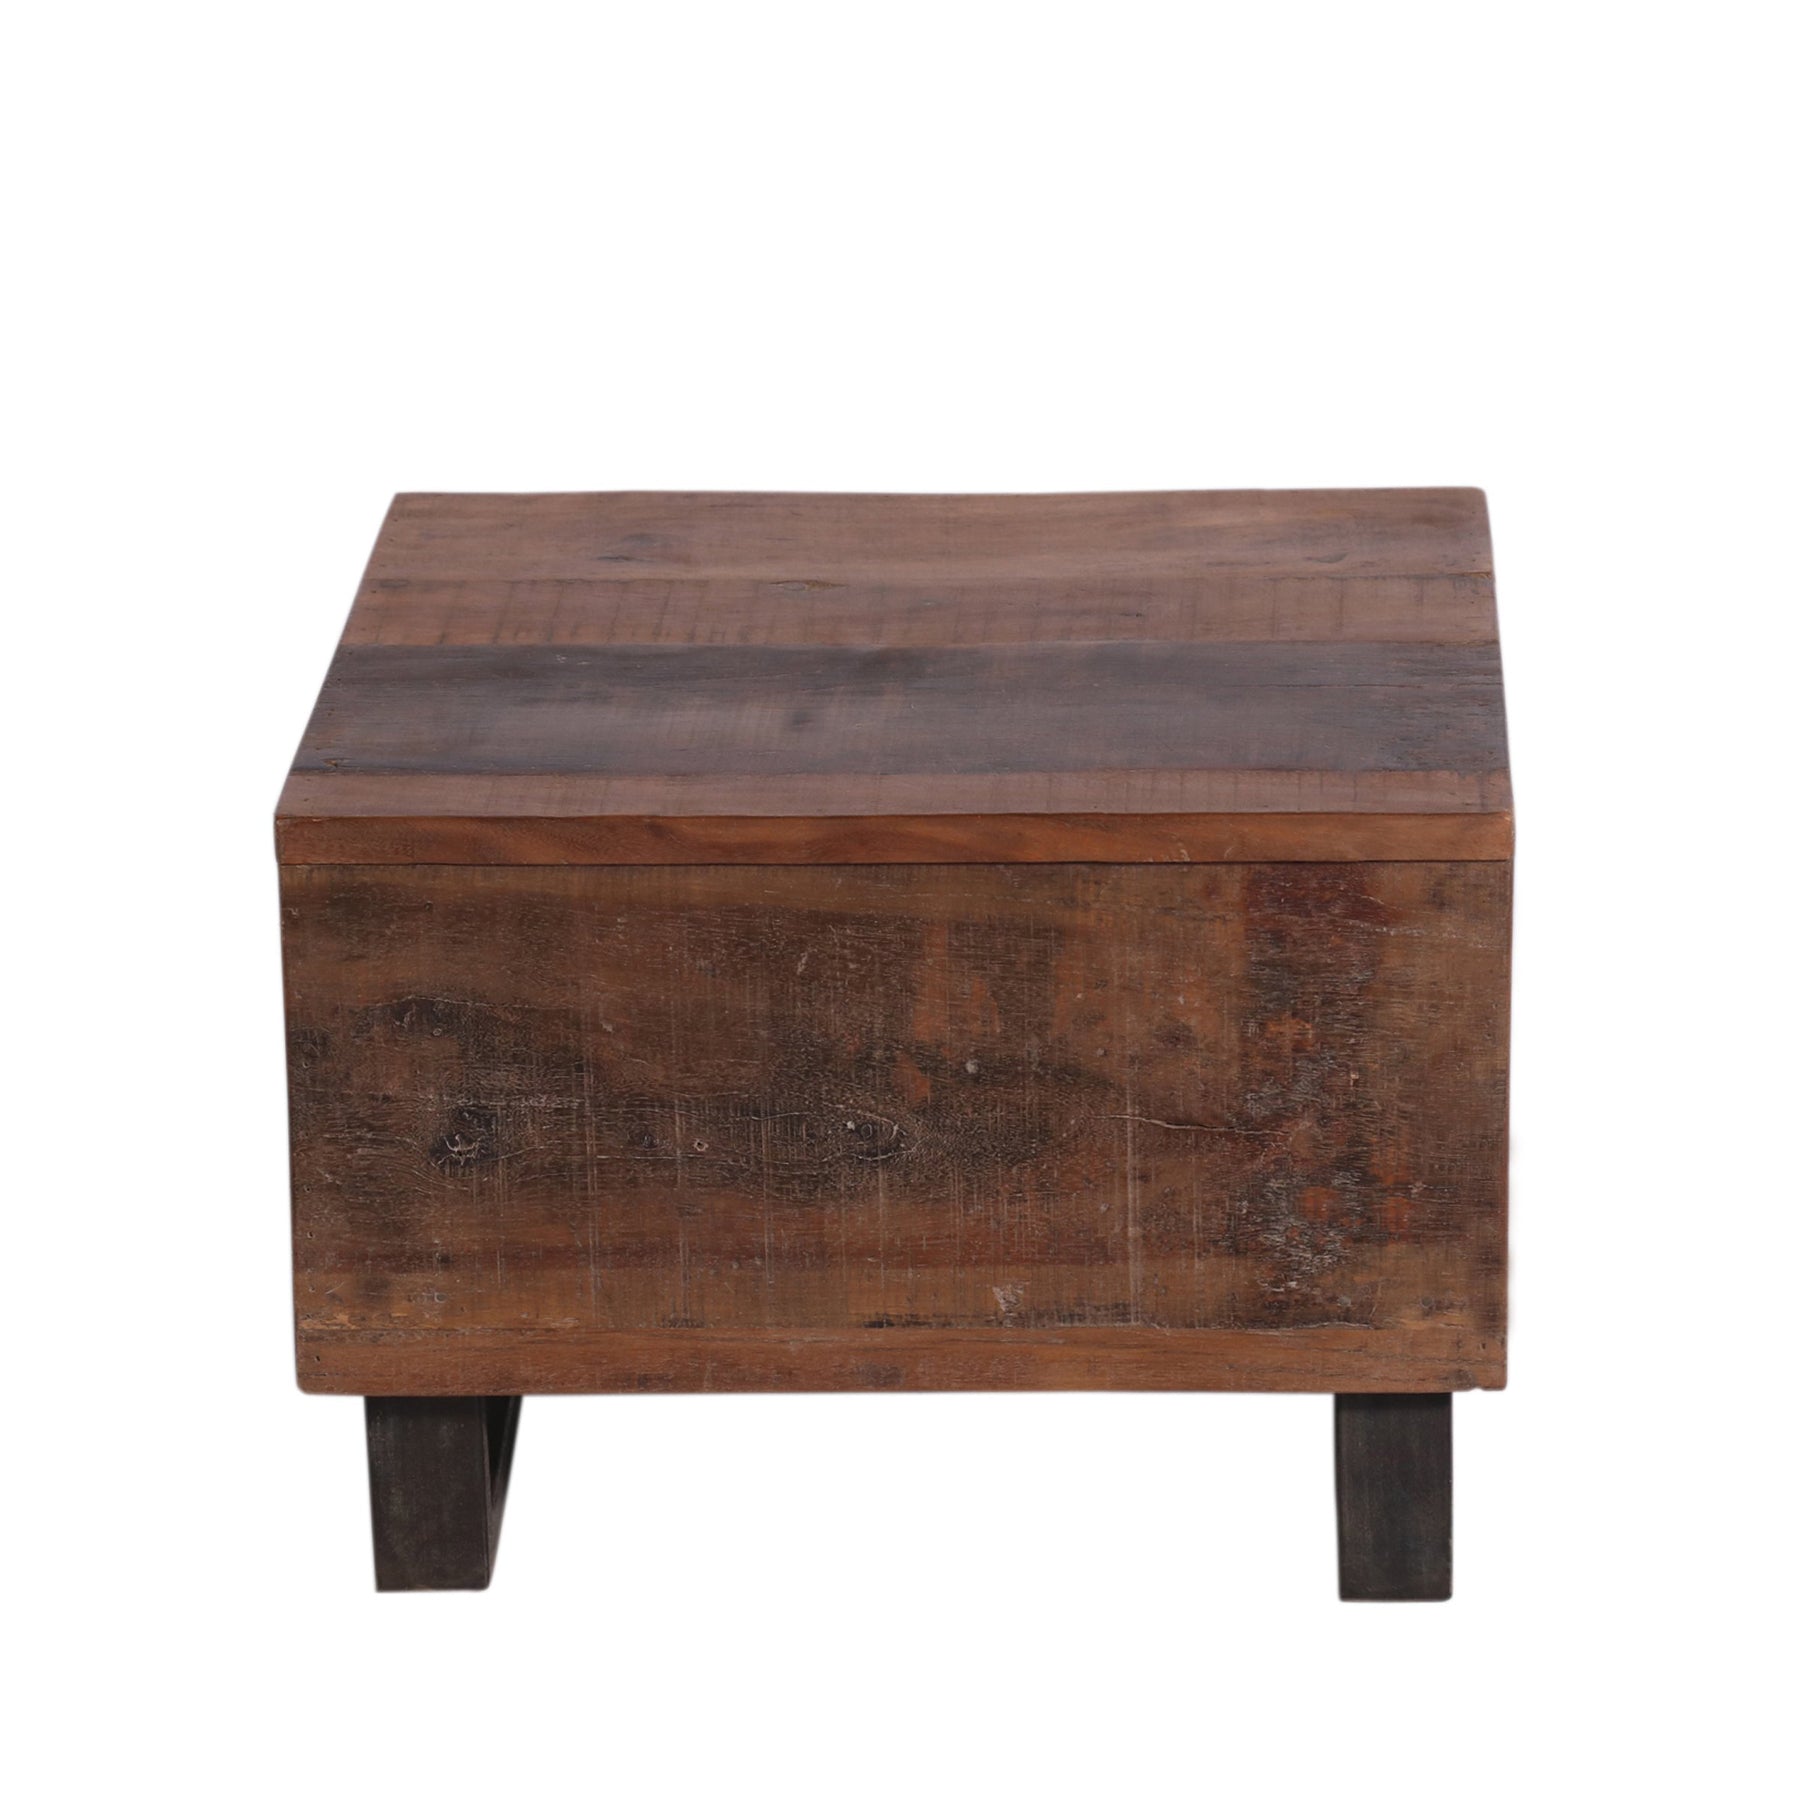 Country Wood Brown Antique style Coffee Table Coffee Table